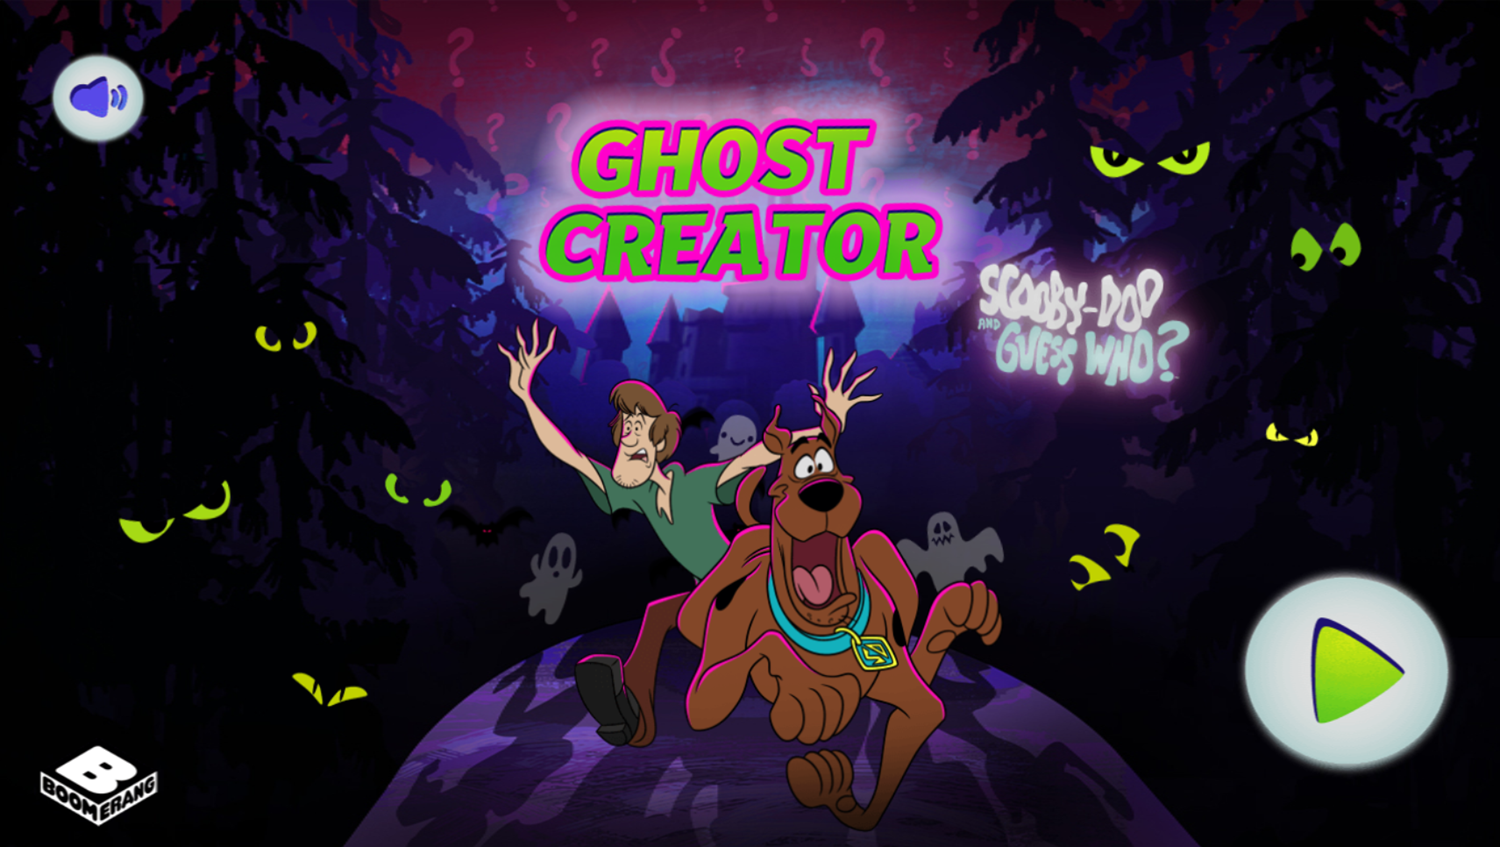 Scooby Doo and Guess Who Ghost Creator Game Welcome Screen Screenshot.